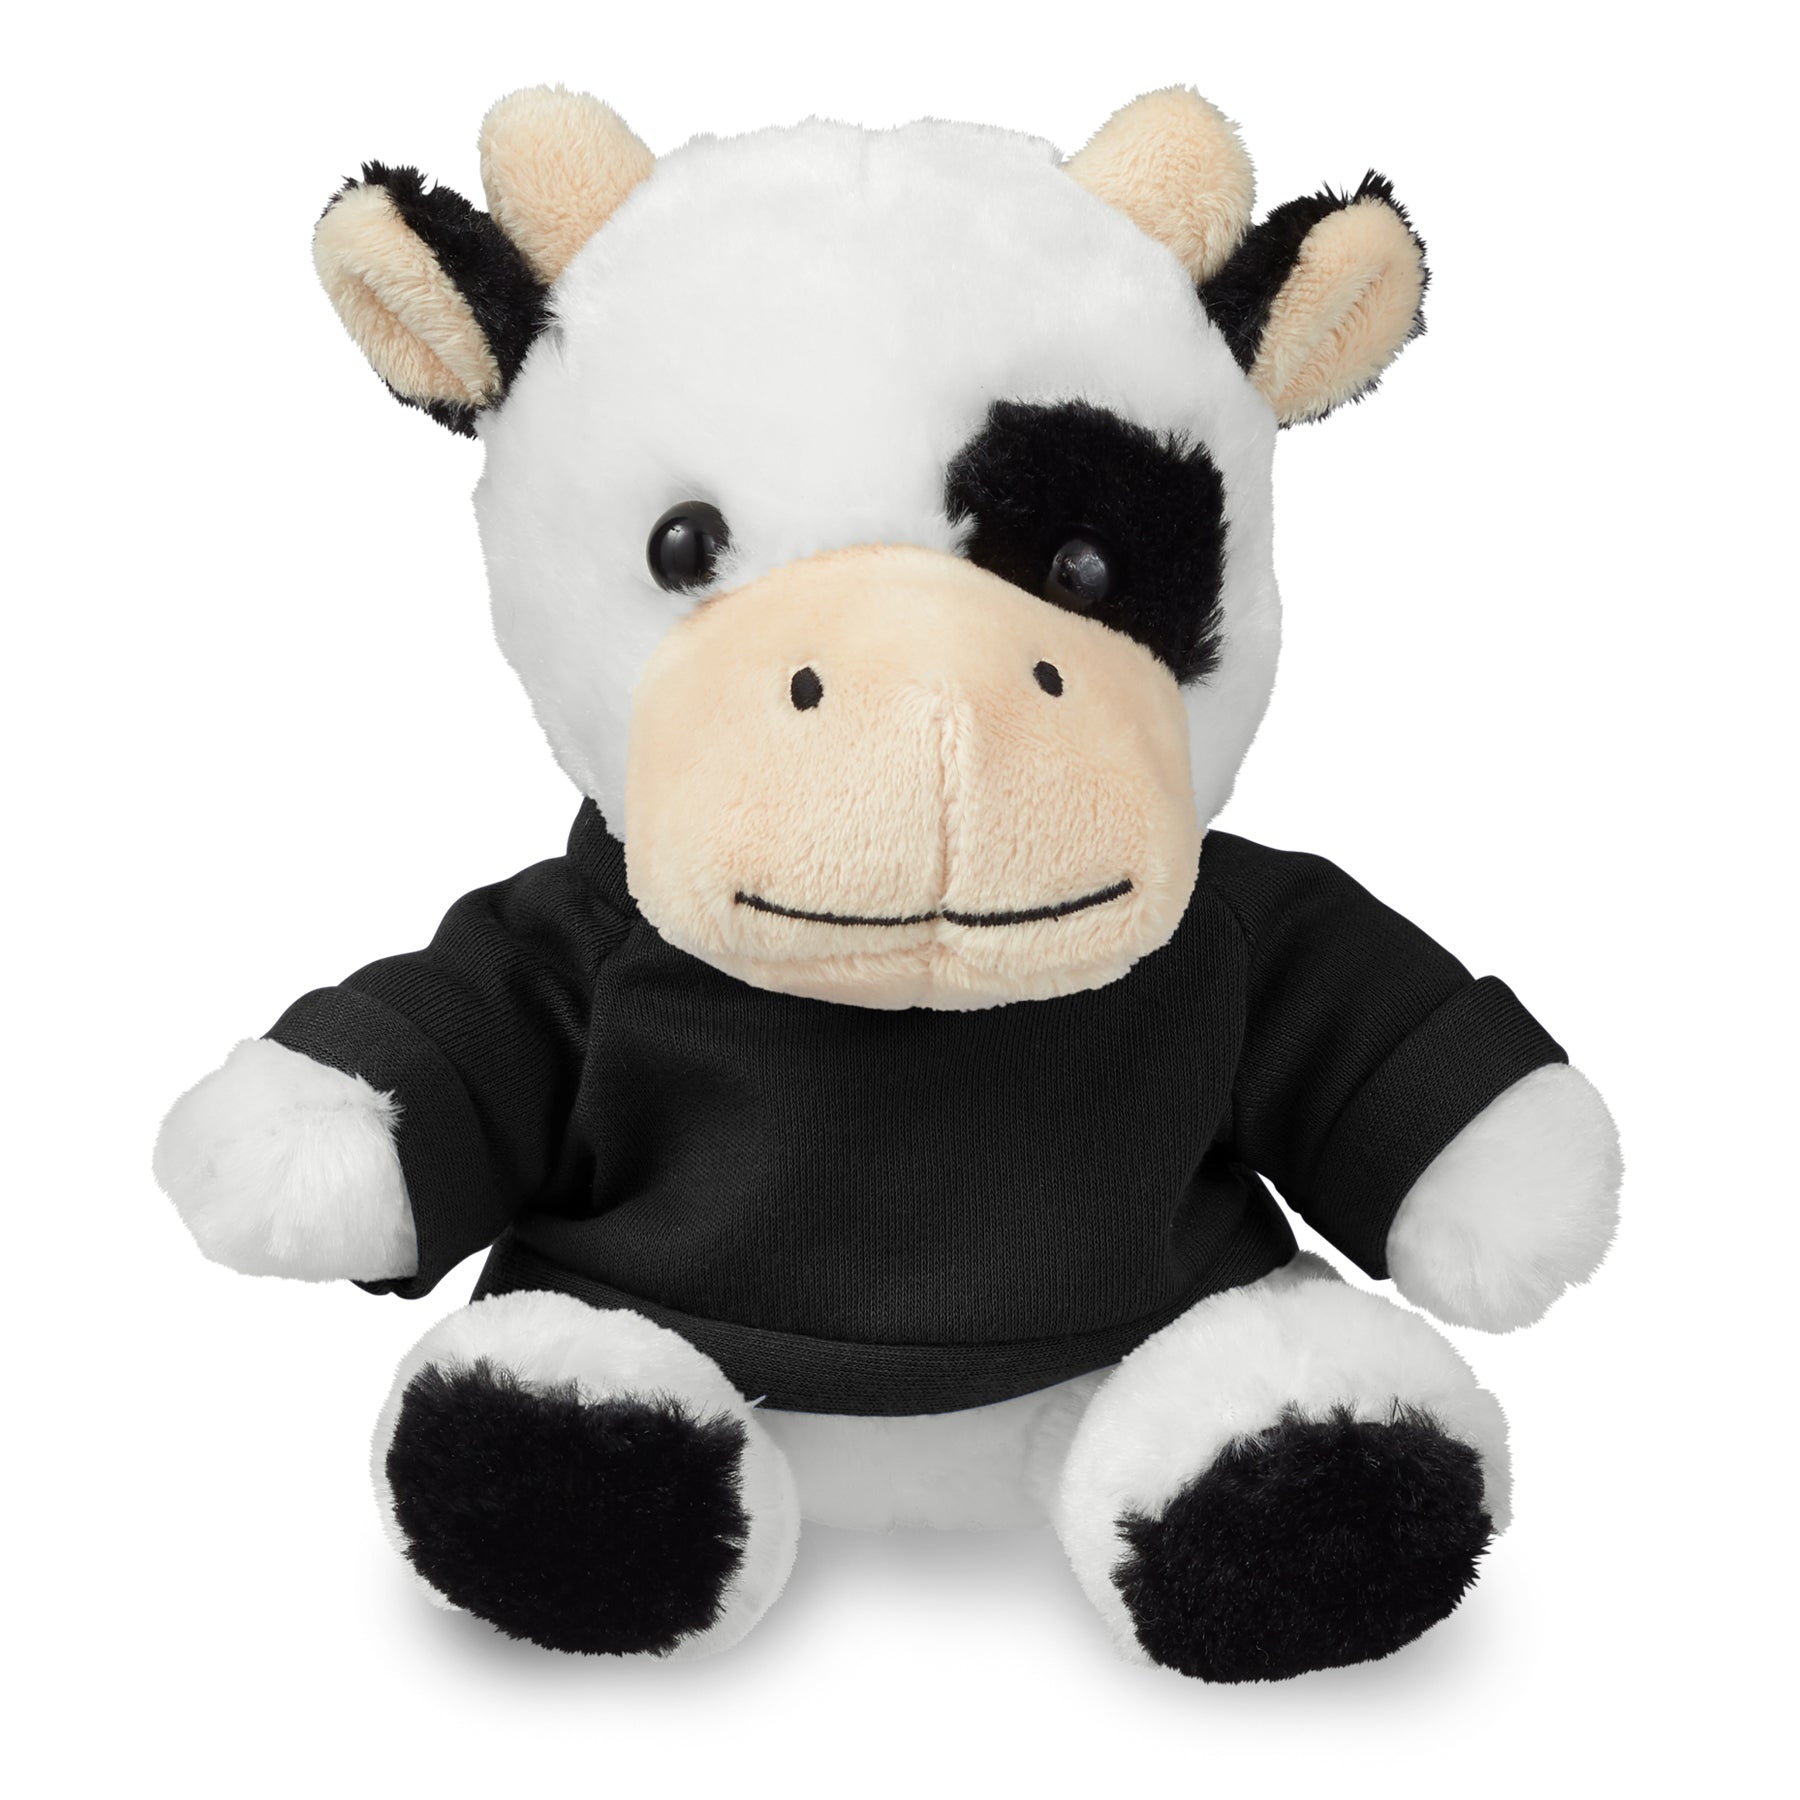 7" PLUSH COW WITH T-SHIRT